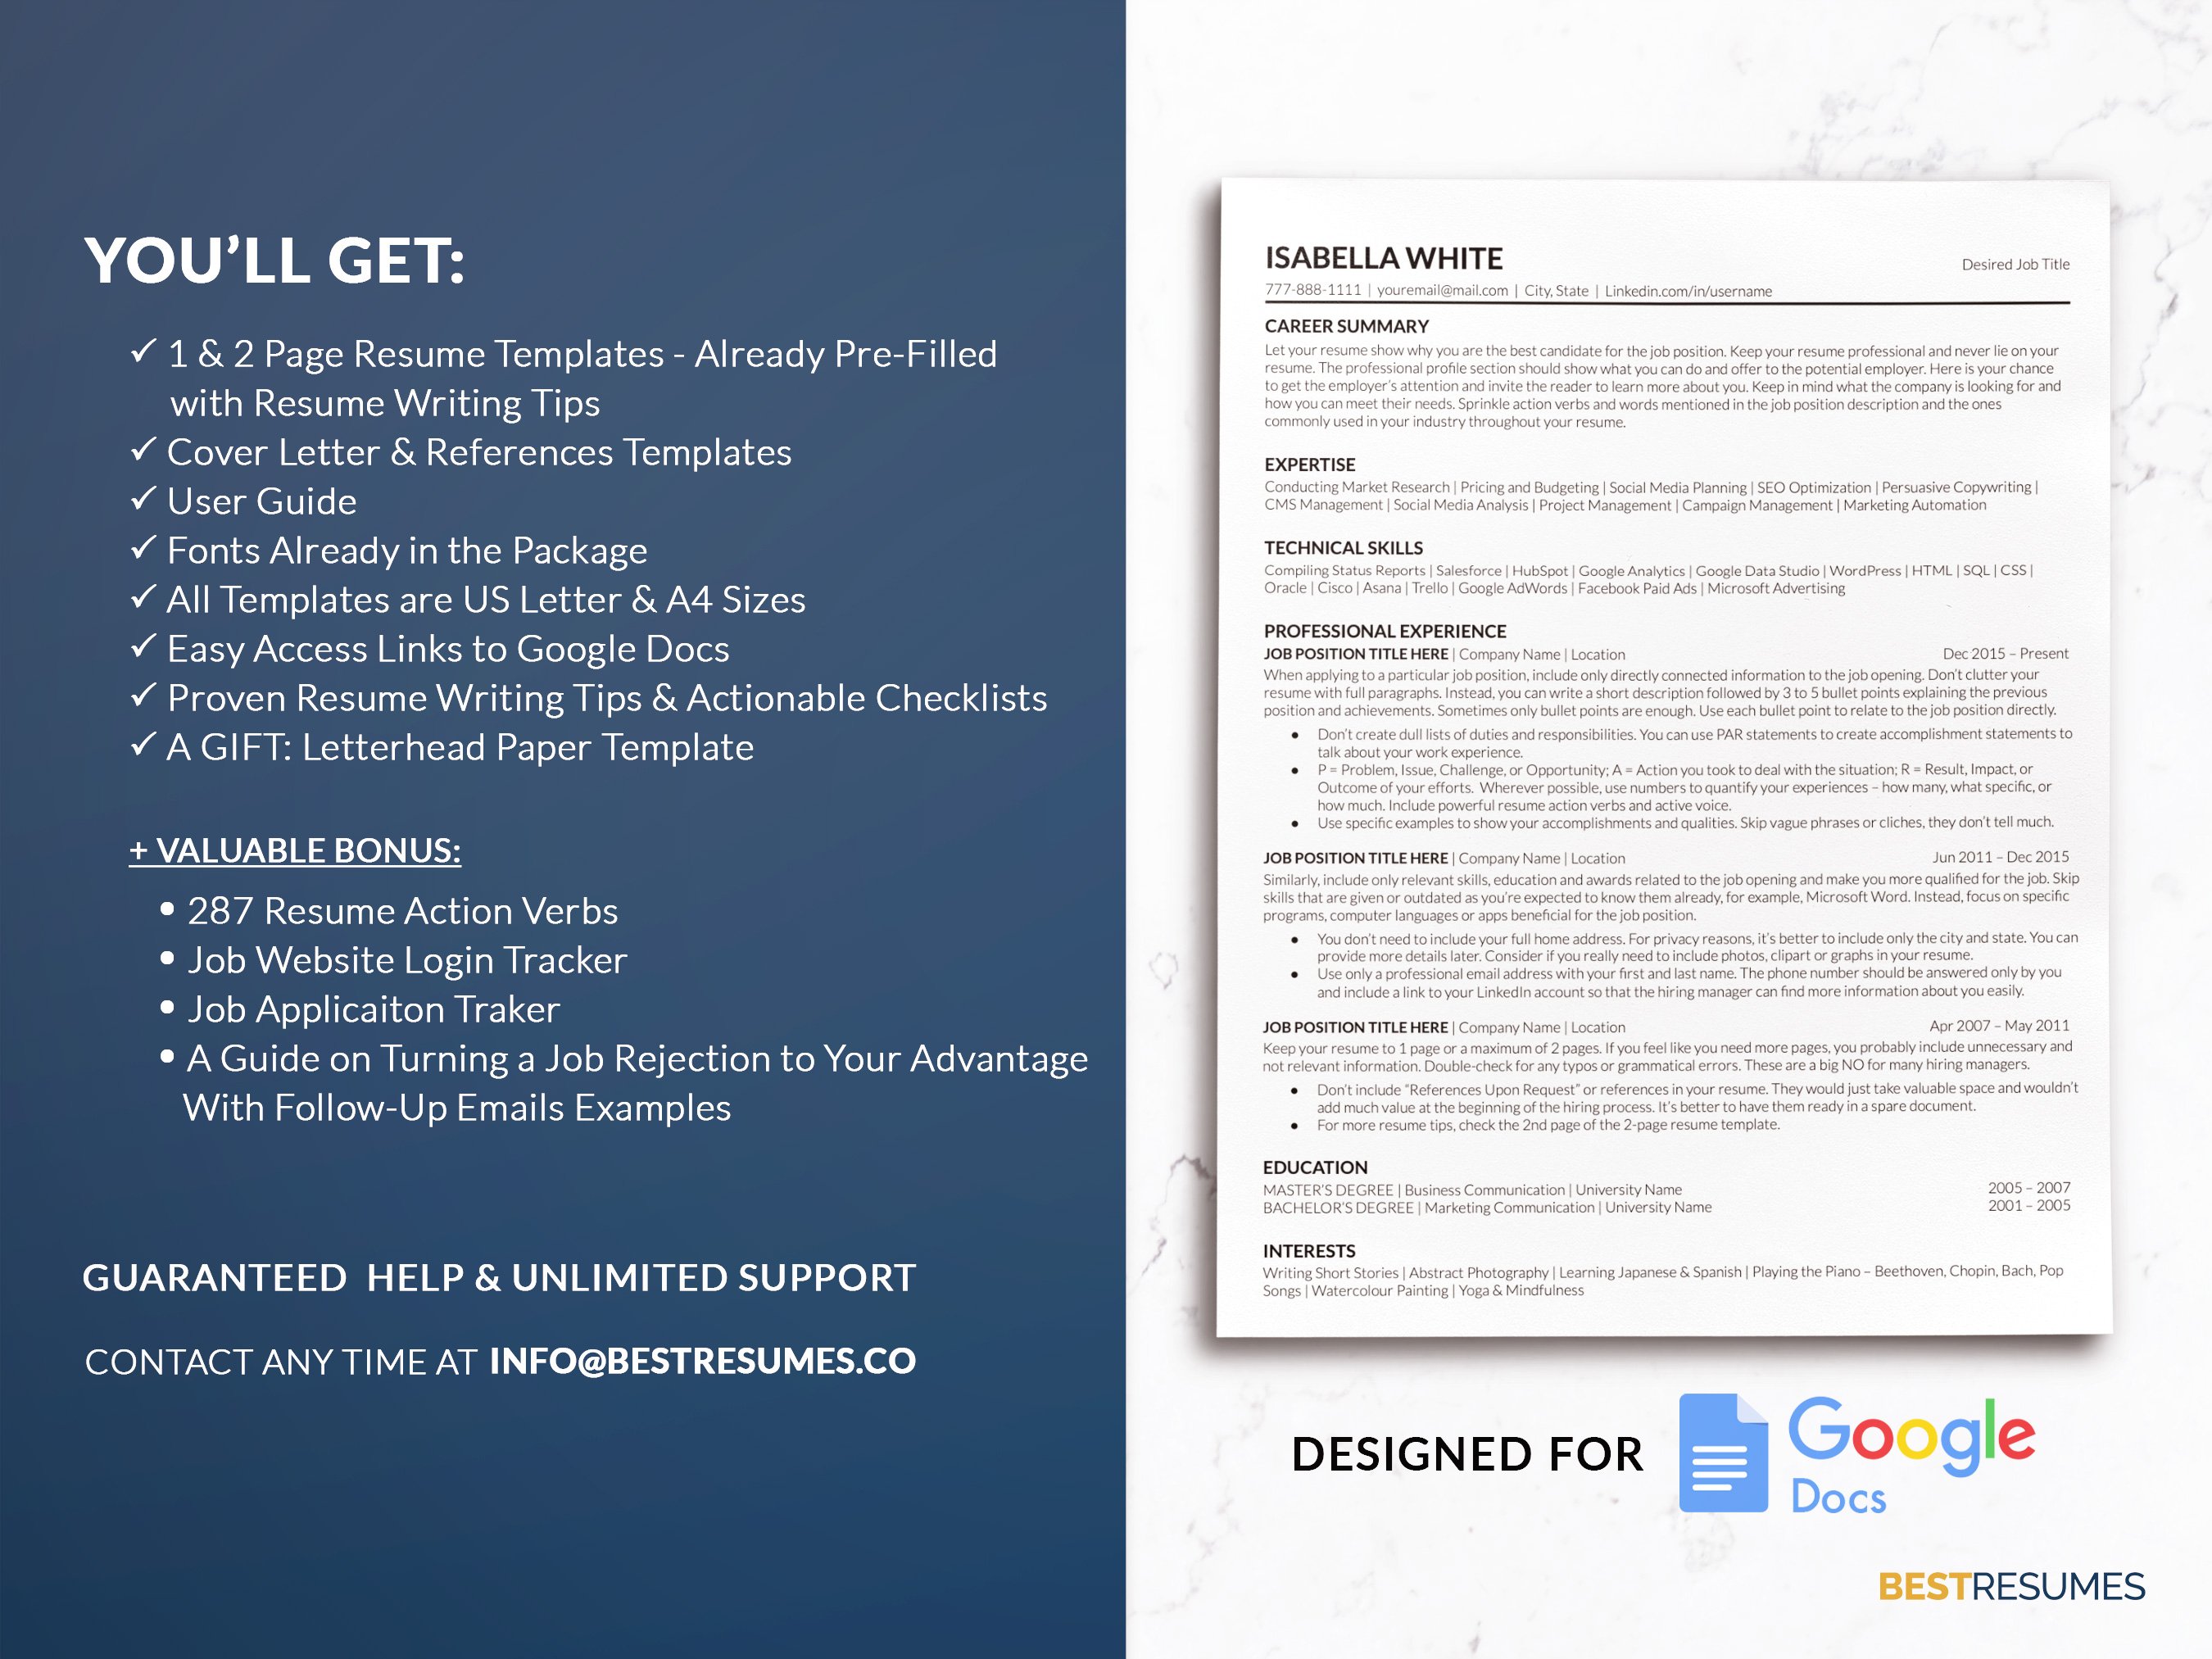 ats friendly resume template google docs compact resume package isabella white 580